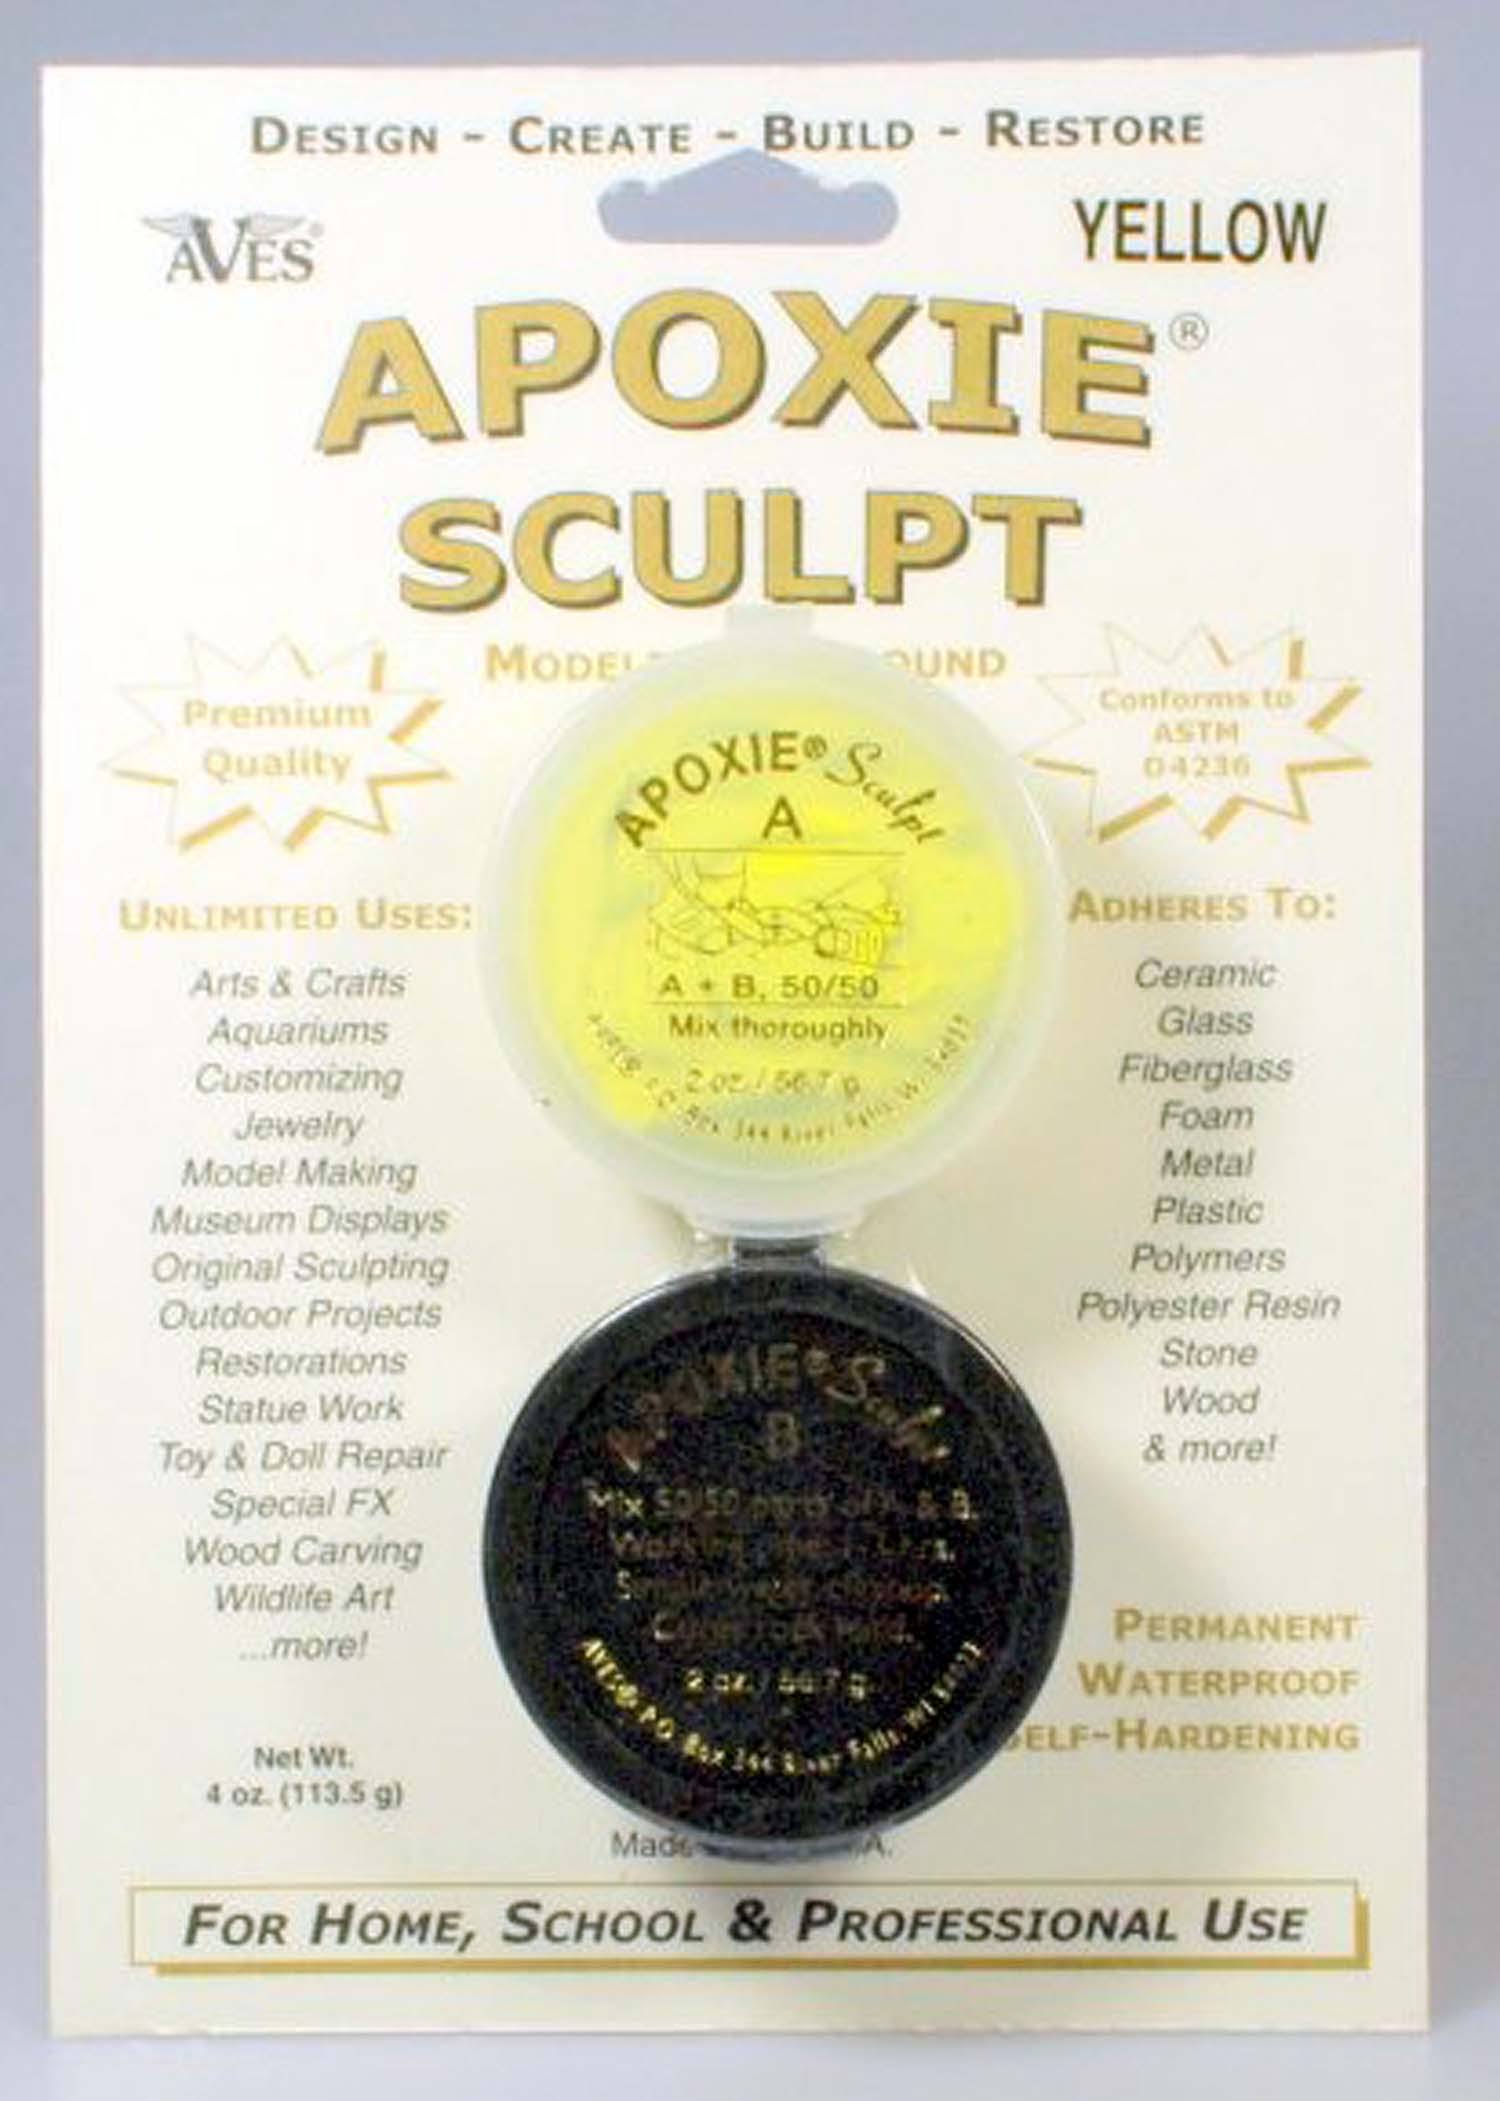 Aves Apoxie Sculpt Yellow 2-Part Self-Hardening Modeling Compound 1/4 lb AS14YEL